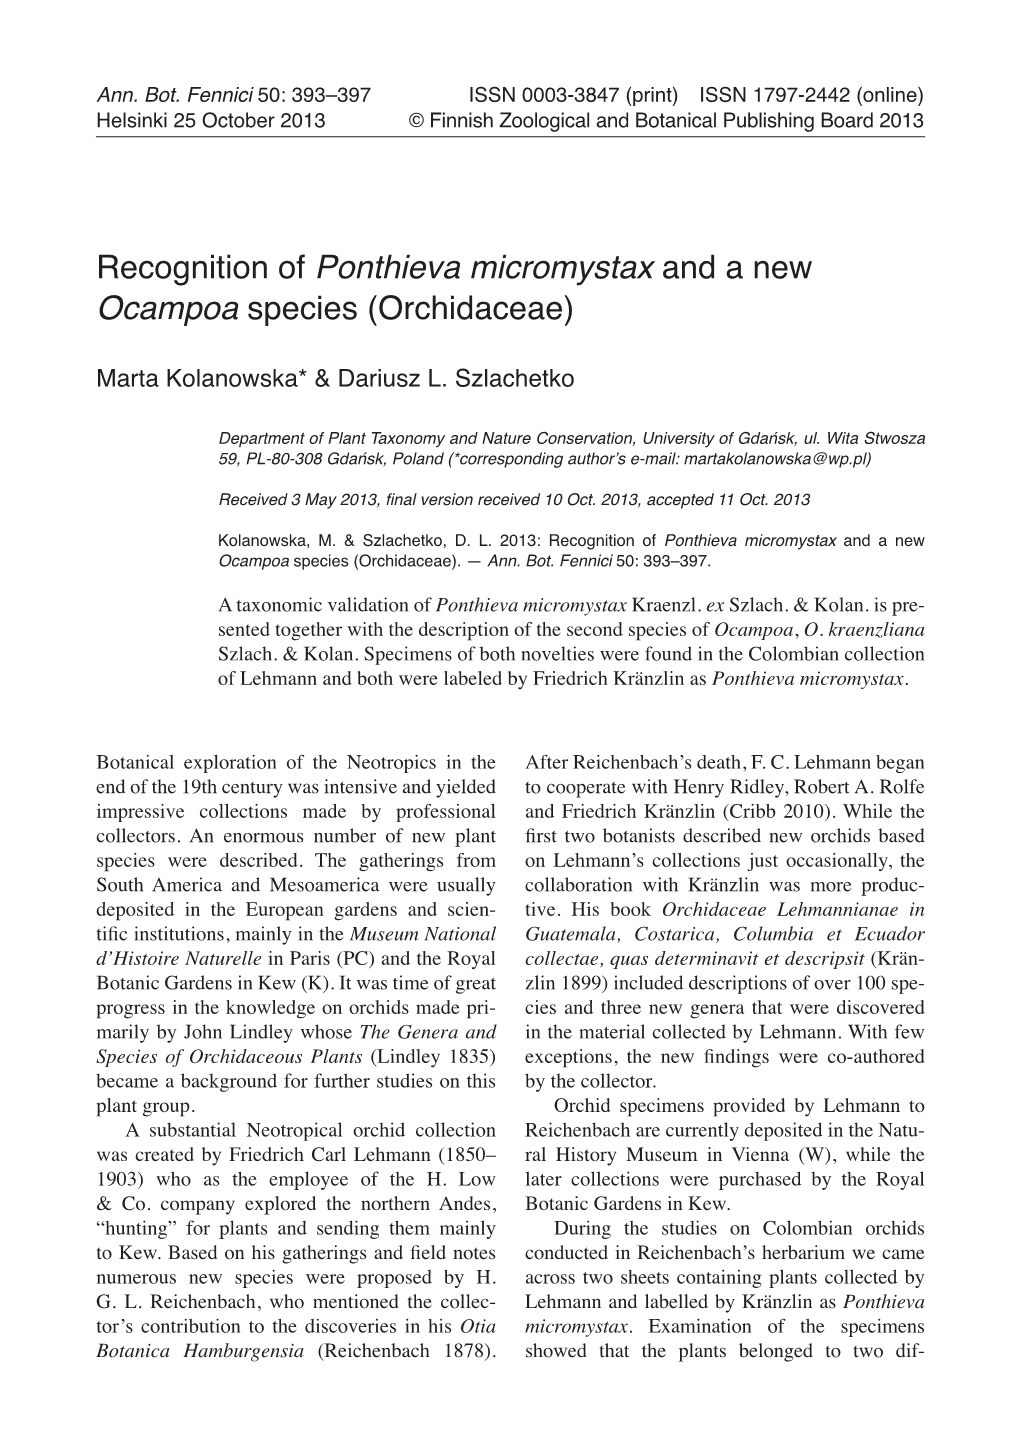 Recognition of Ponthieva Micromystax and a New Ocampoa Species (Orchidaceae)